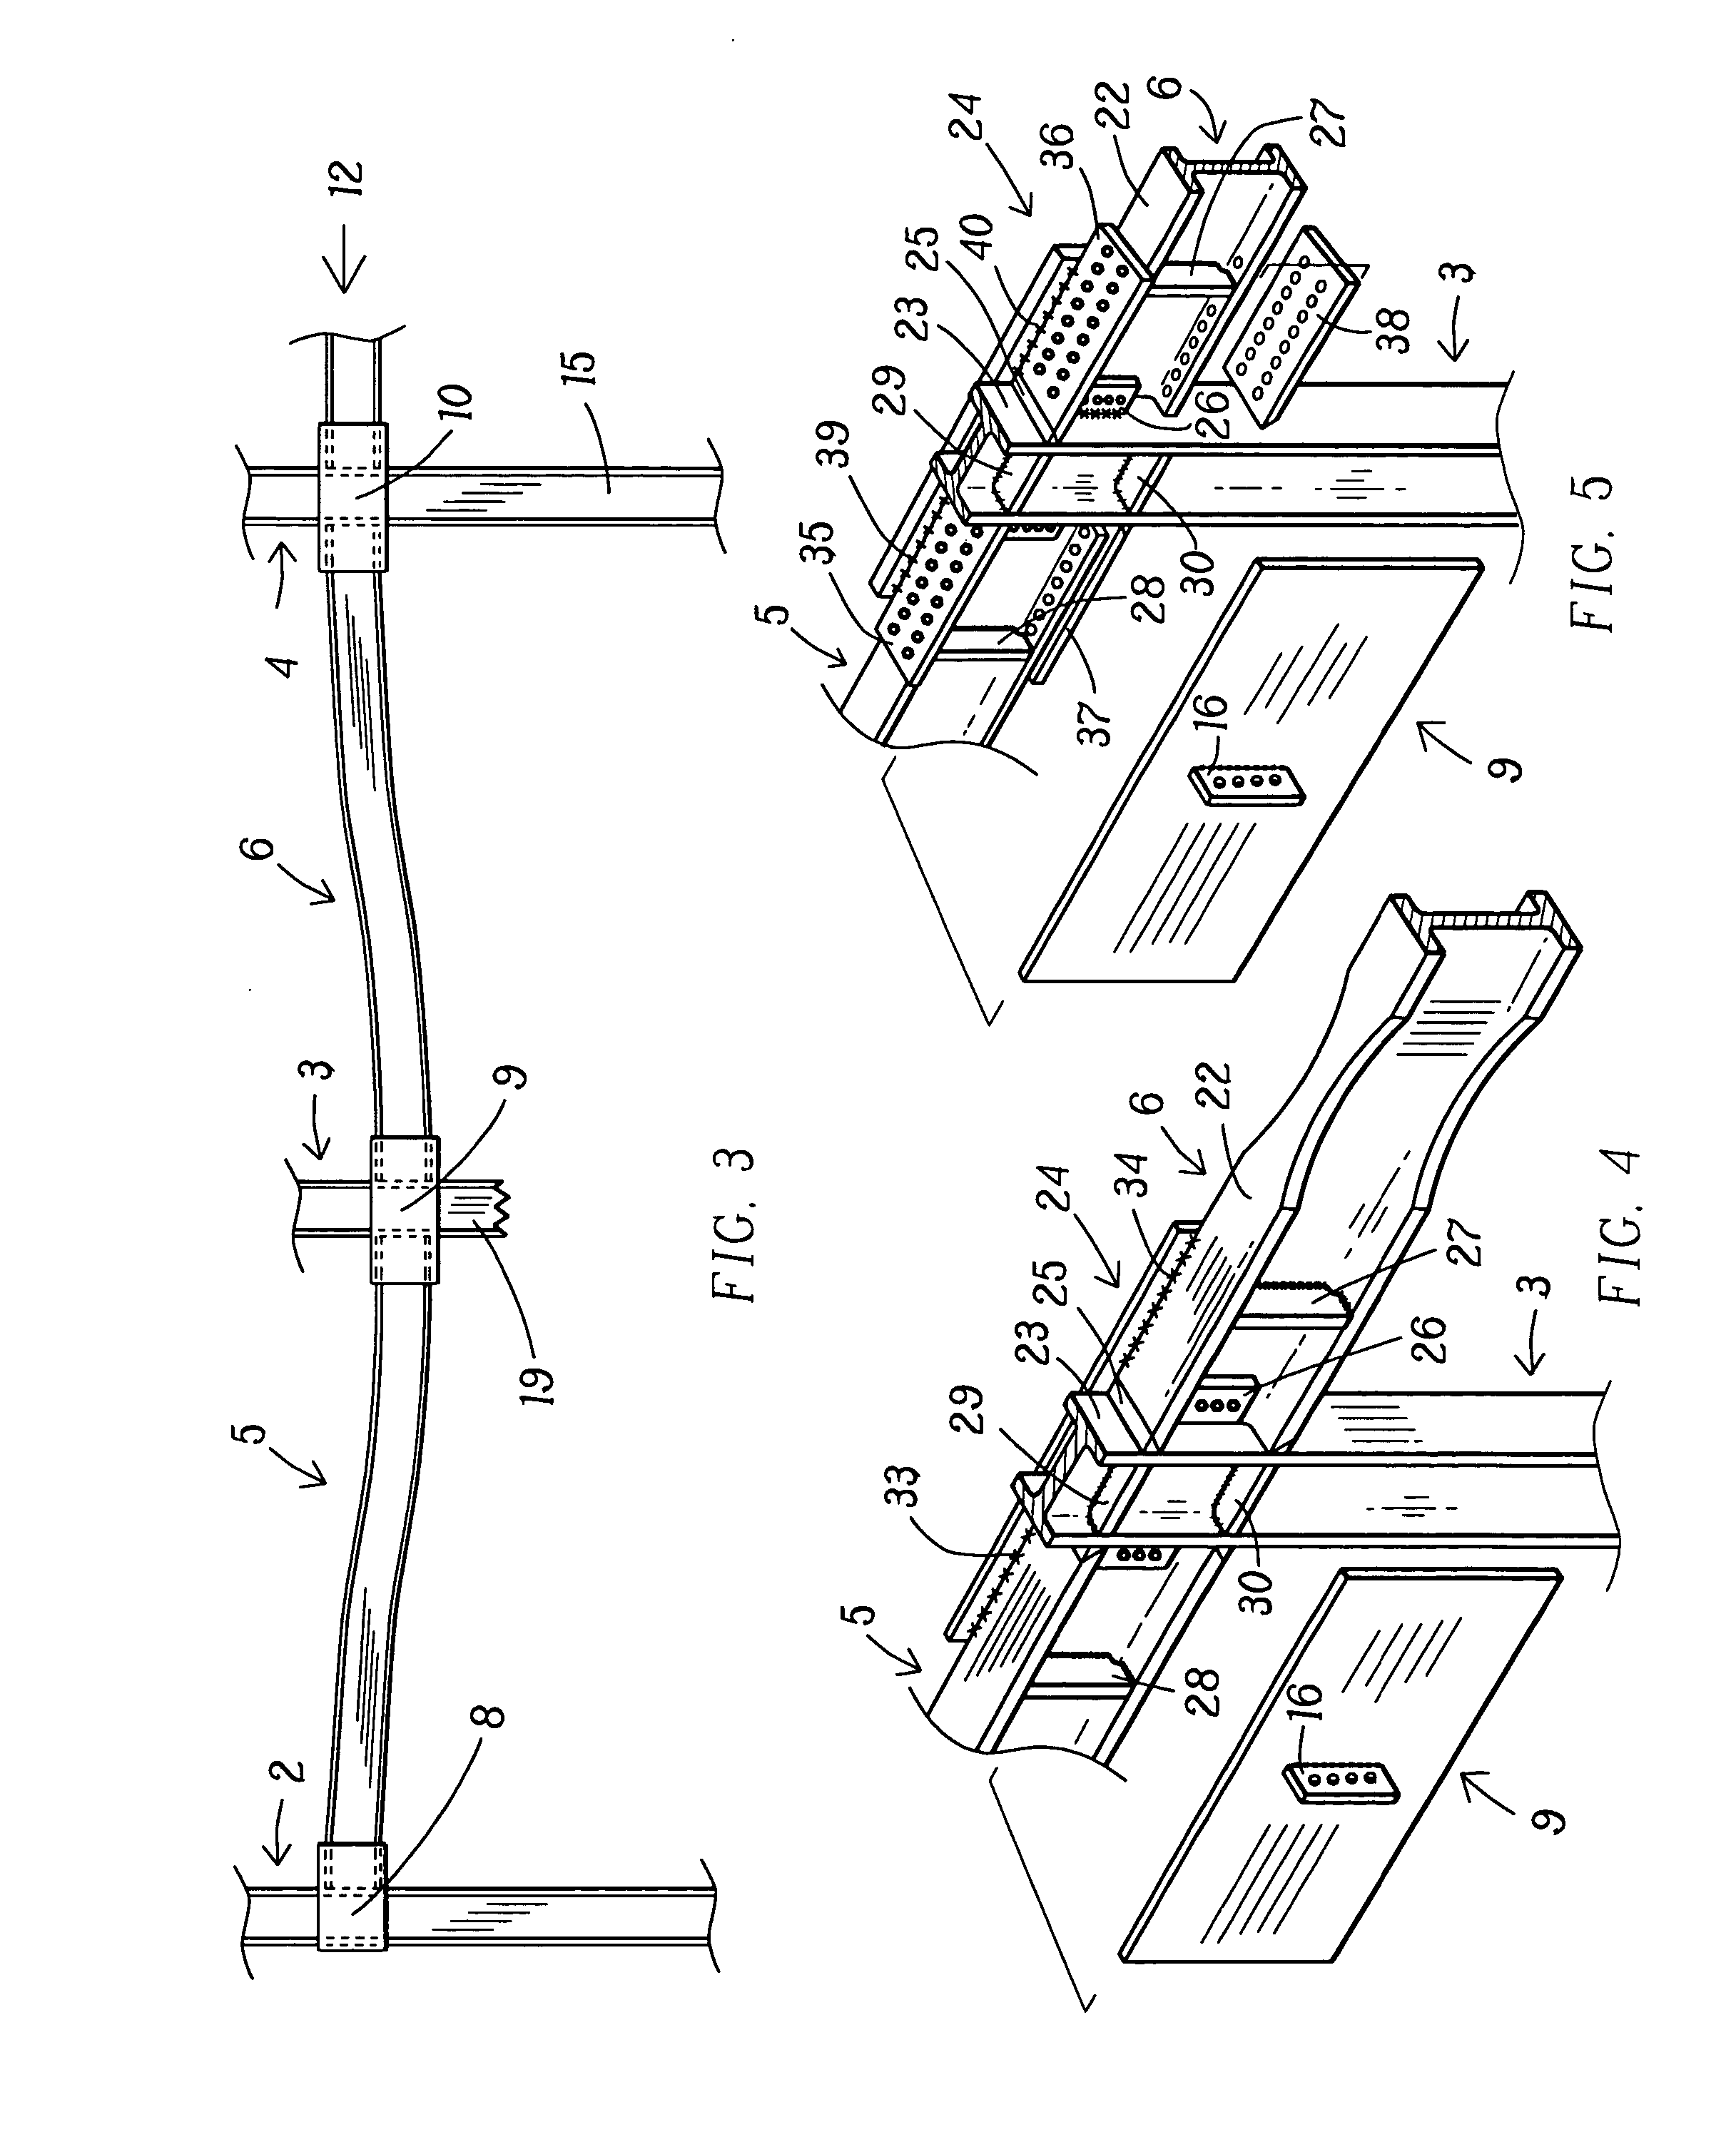 Structural joint connection providing blast resistance and a beam-to-beam connection resistant to moments, tension and torsion across a column